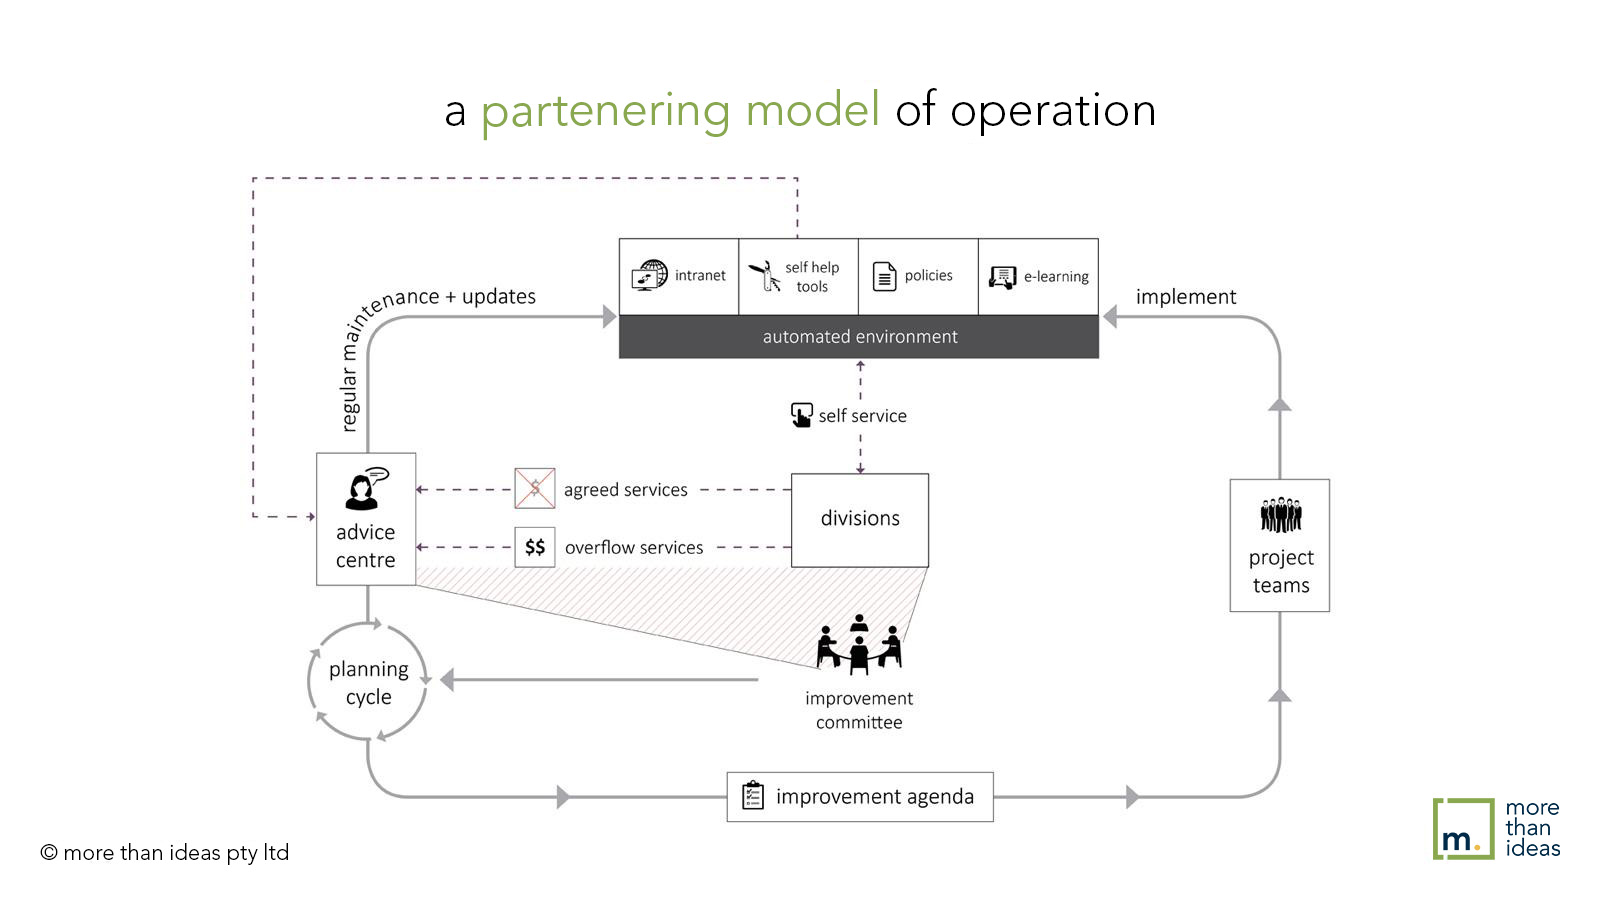 image depicting a partnering model of operation